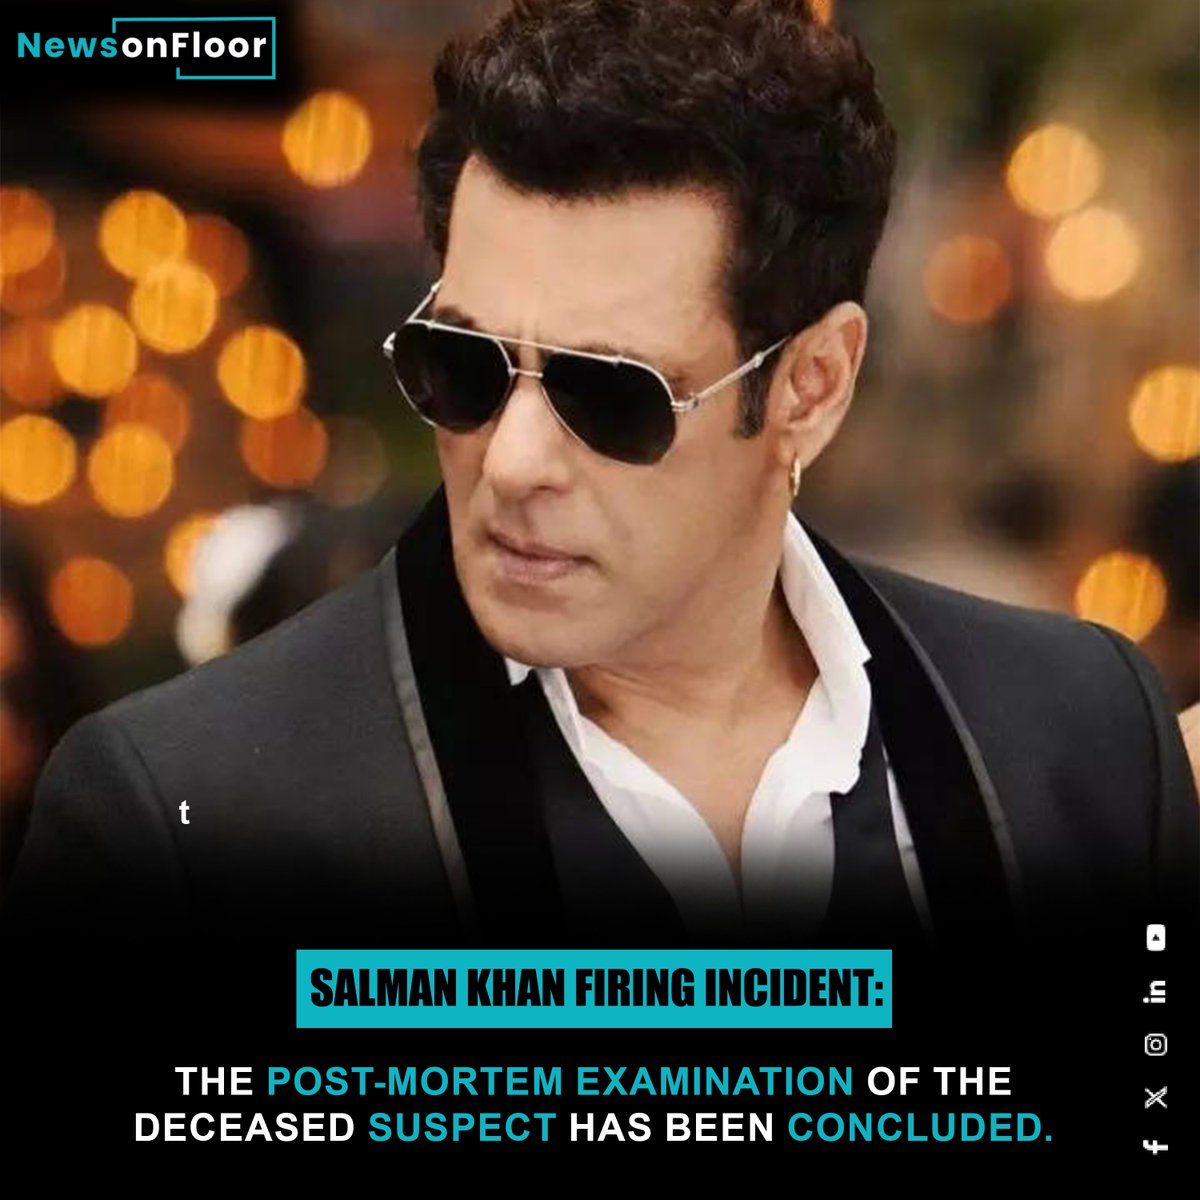 After being shifted to the morgue, doctors requested a letter from senior police officials before commencing the post-mortem at 4:15 pm. Thapan's relatives were expected to arrive in Mumbai late in the evening by train. #SalmanKhan #bollywood #salmankhanfiringcase